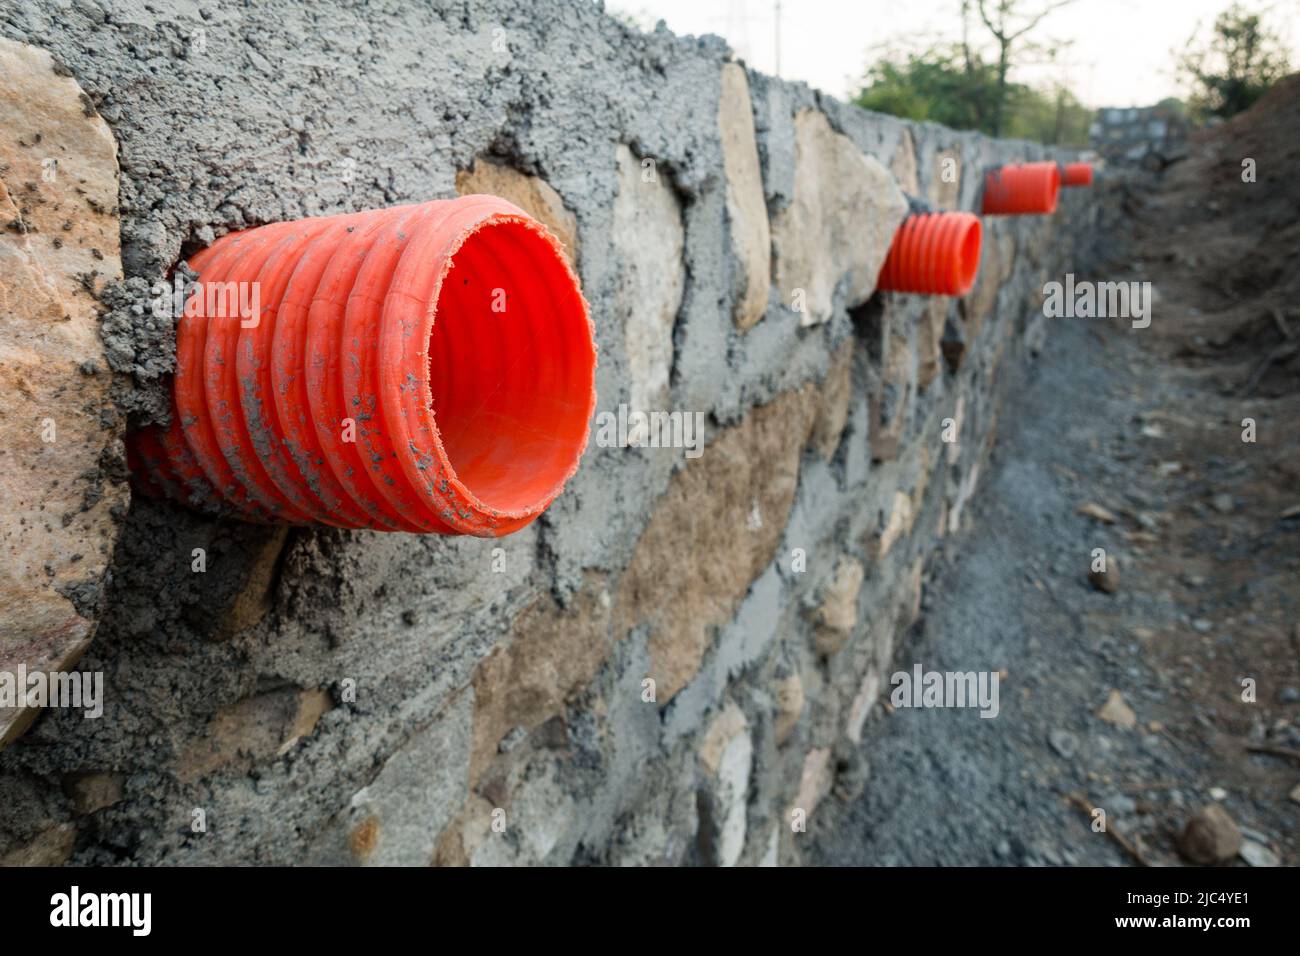 A row of orange culverts or water outlet pipes through a stone retaining wall for storm drainage in the hills of Uttarakhand India. Stock Photo